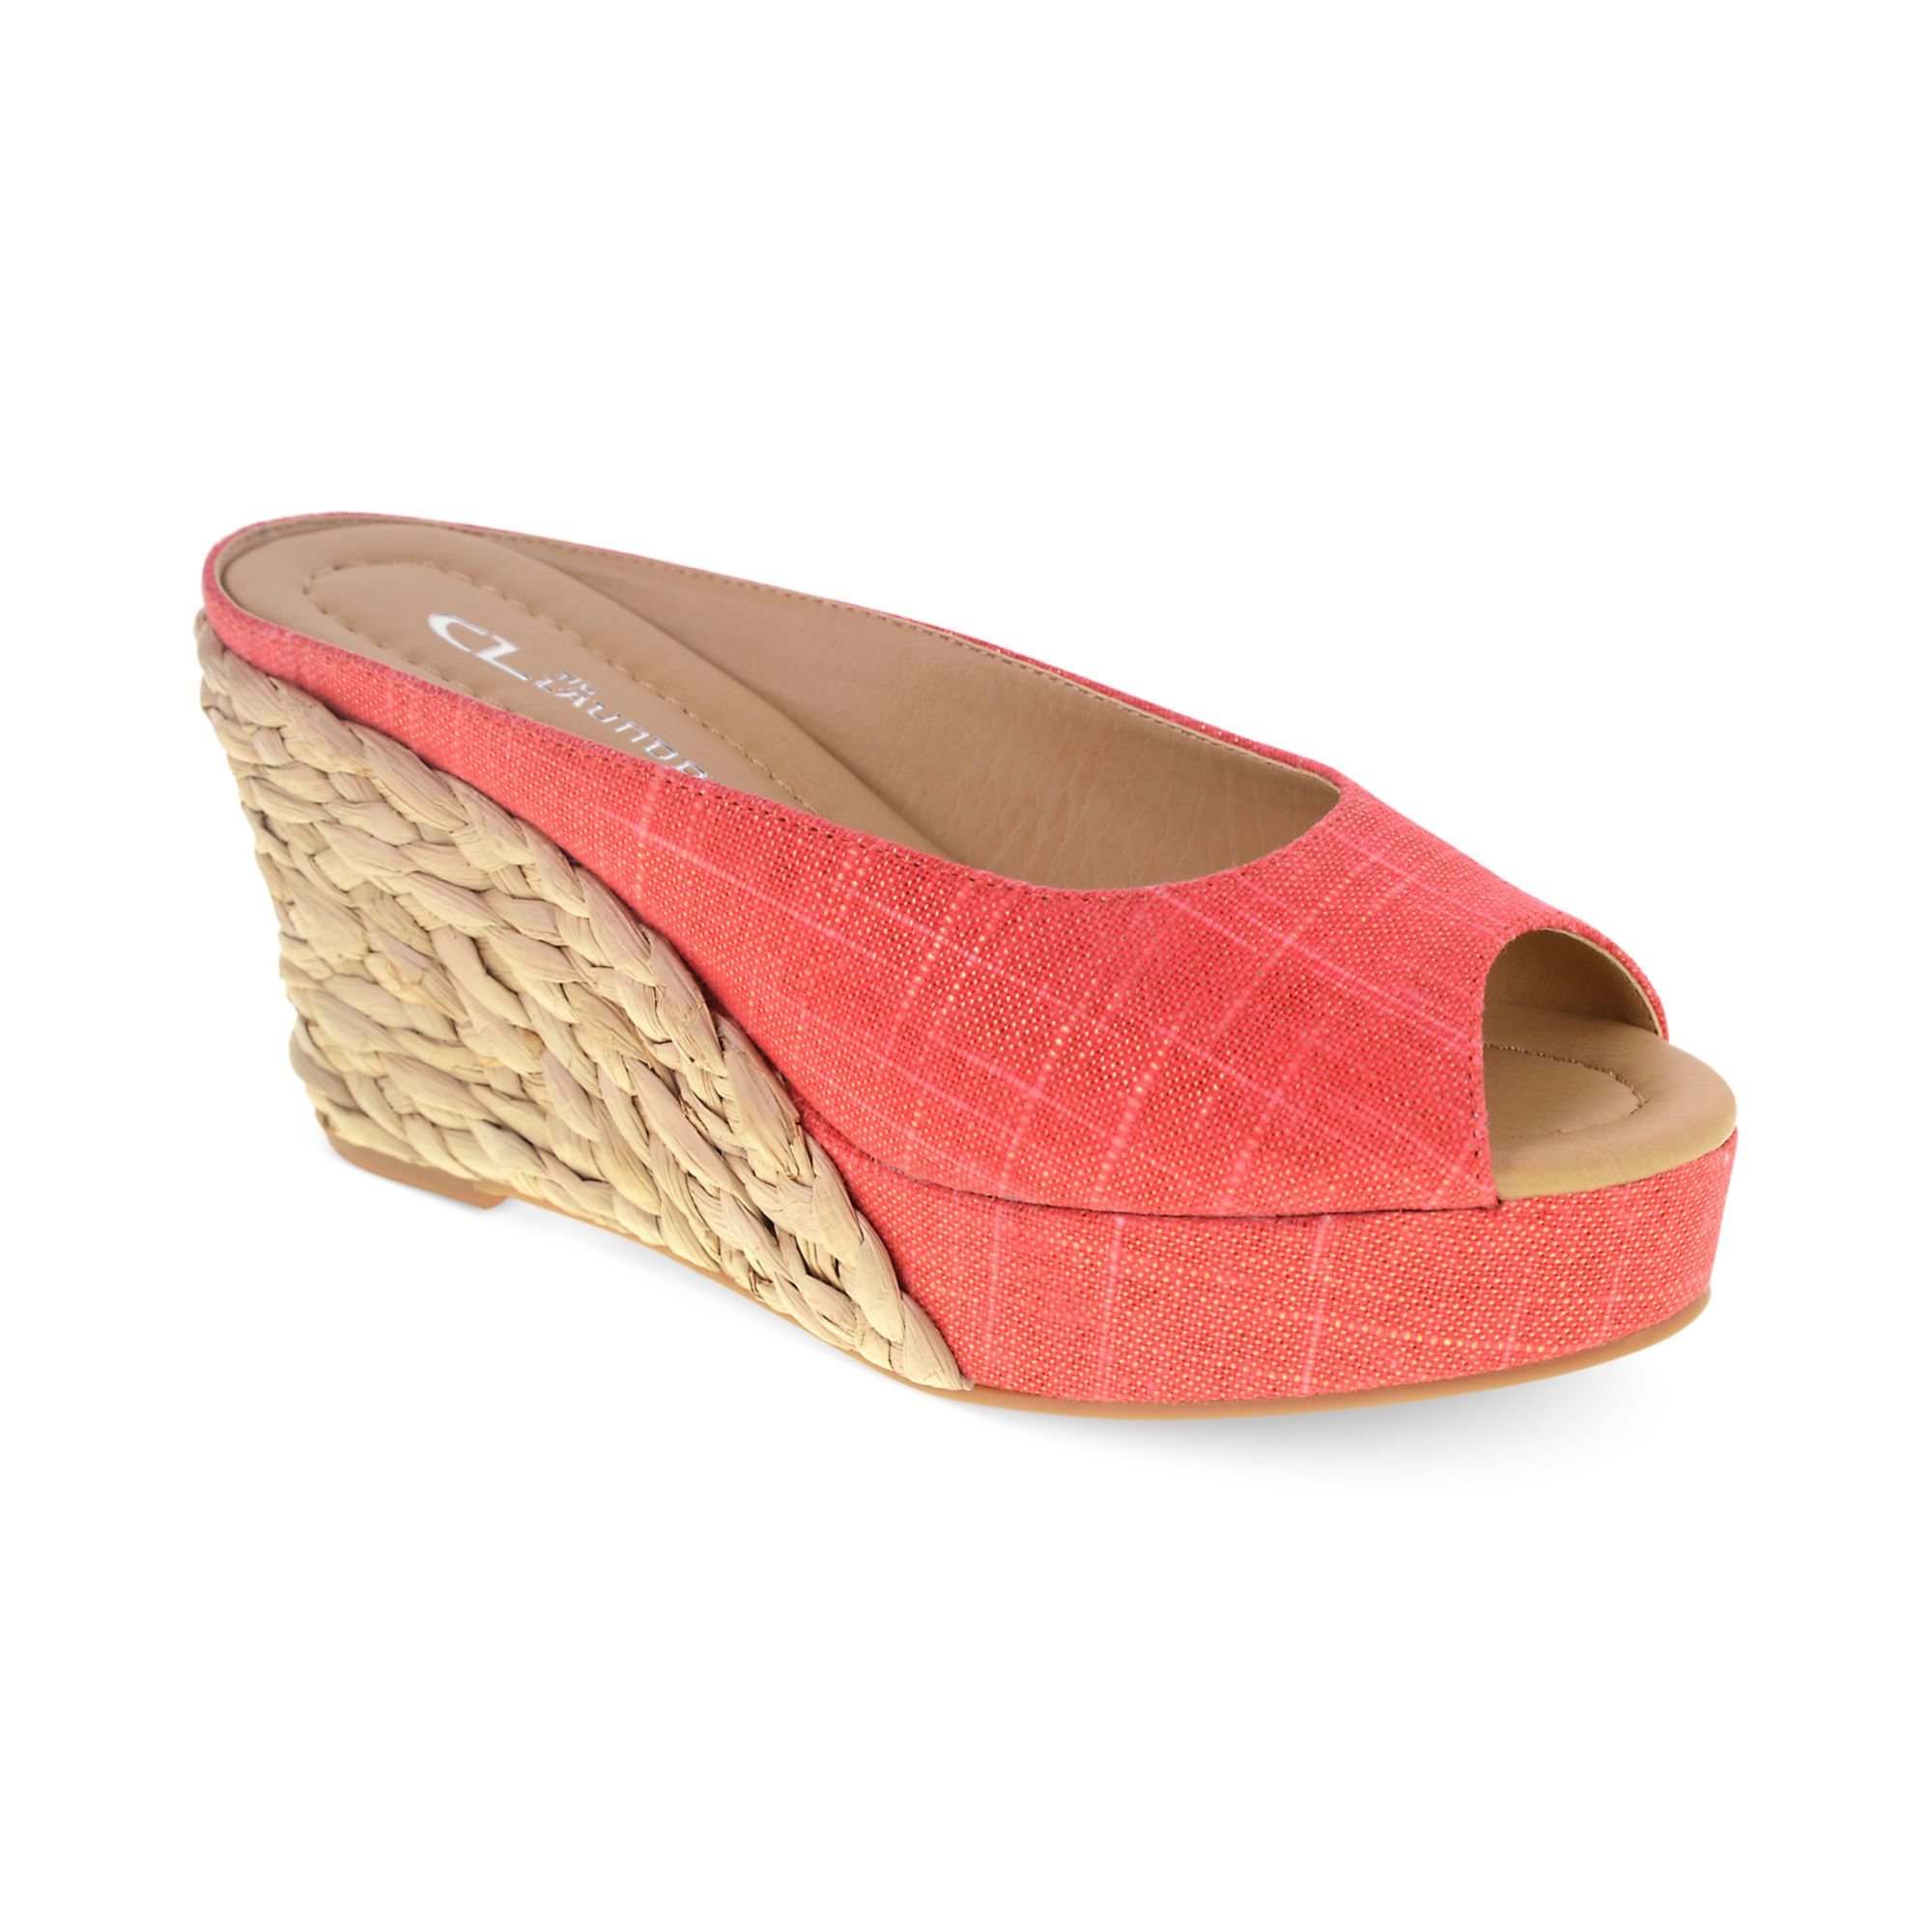 Chinese Laundry Cl By Laundry Daysie Wedge Sandals in Red (Coral Linen ...